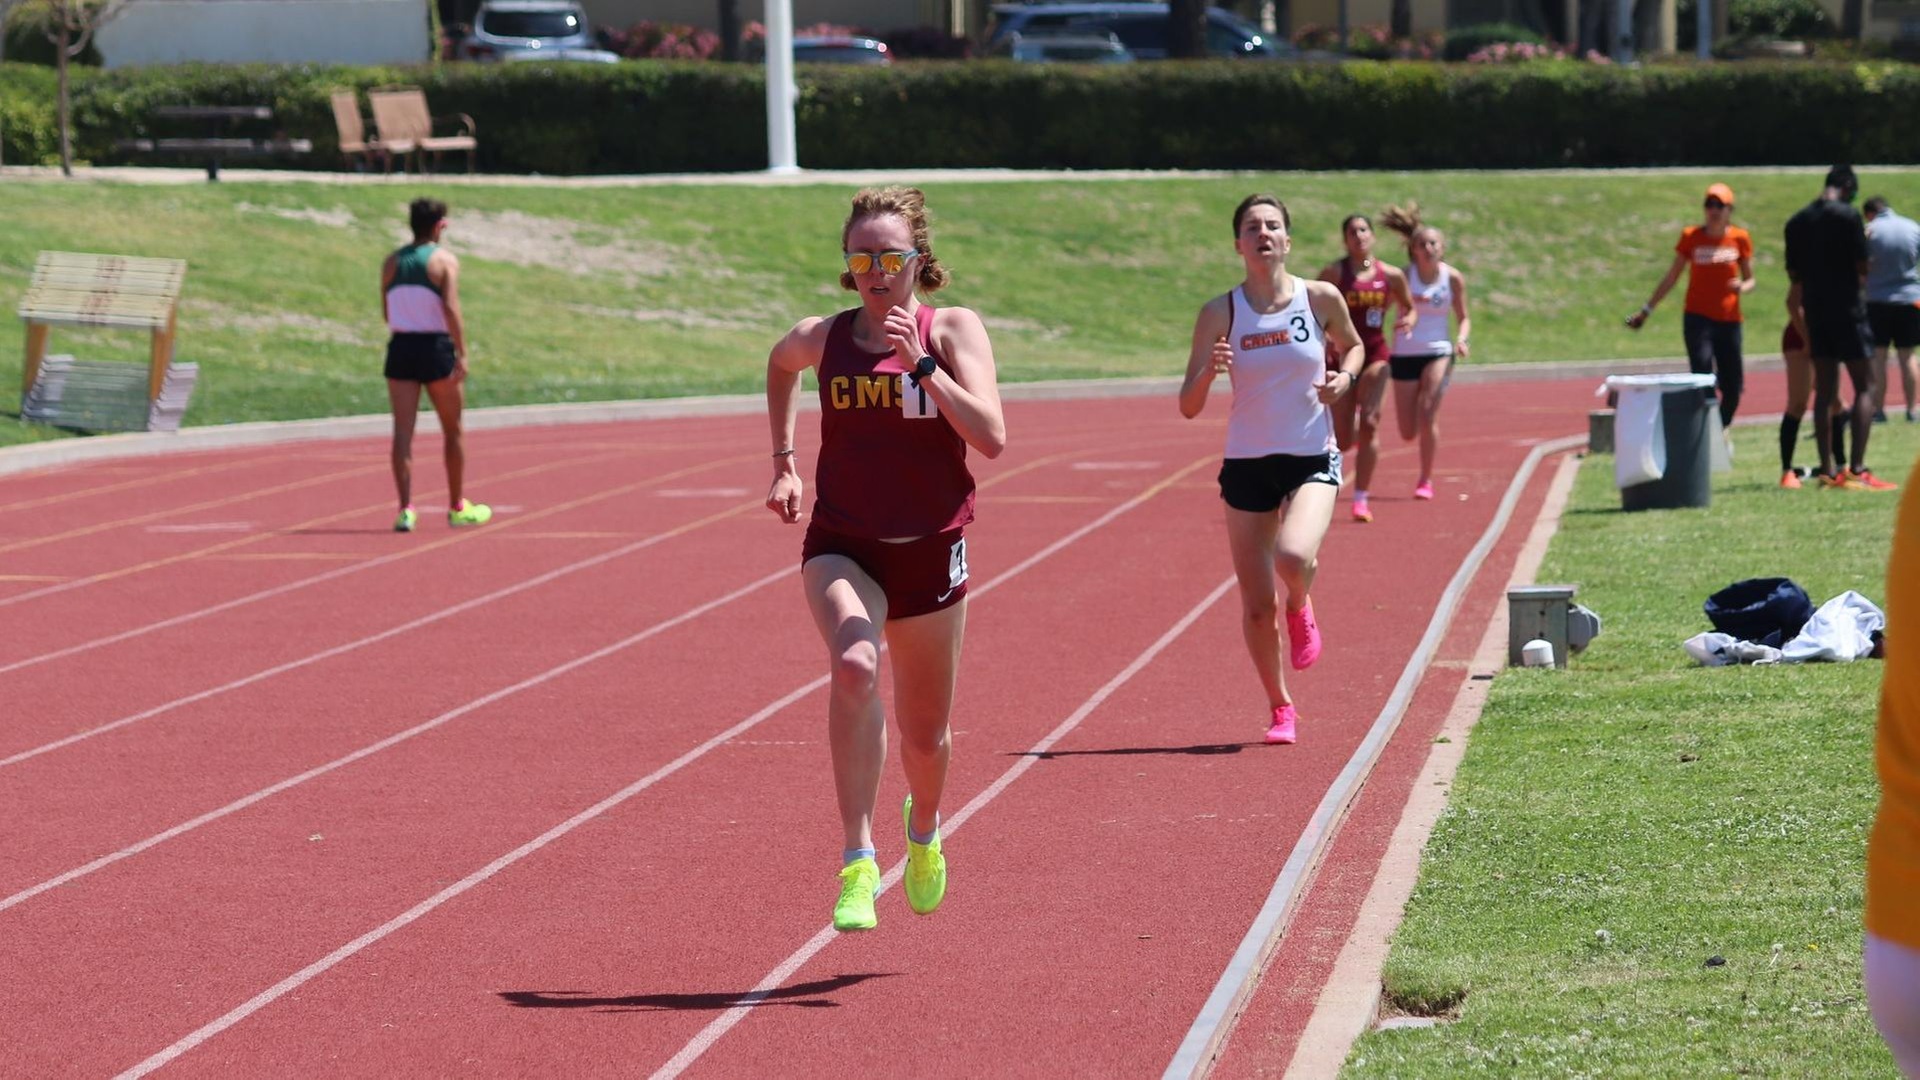 Megan Maley took the 800 in her final home meet